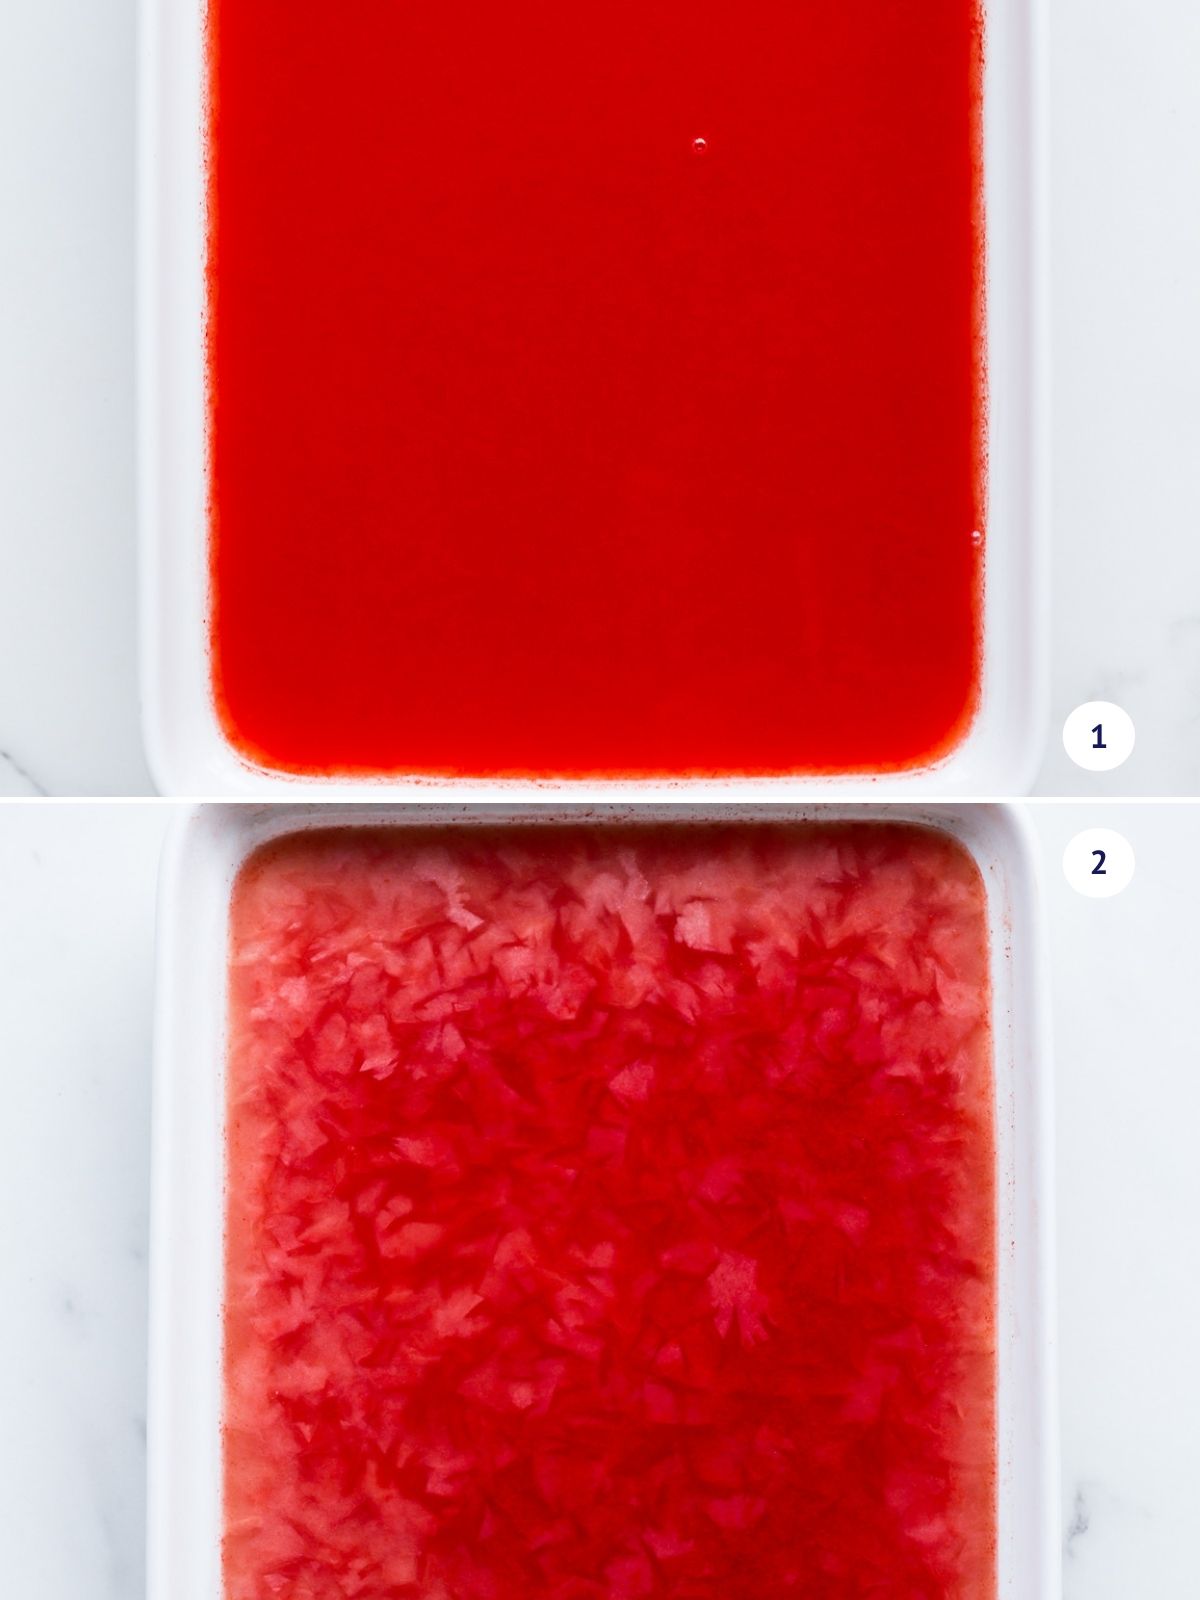 Watermelon juice before and after freezing in a shallow dish to make granita.